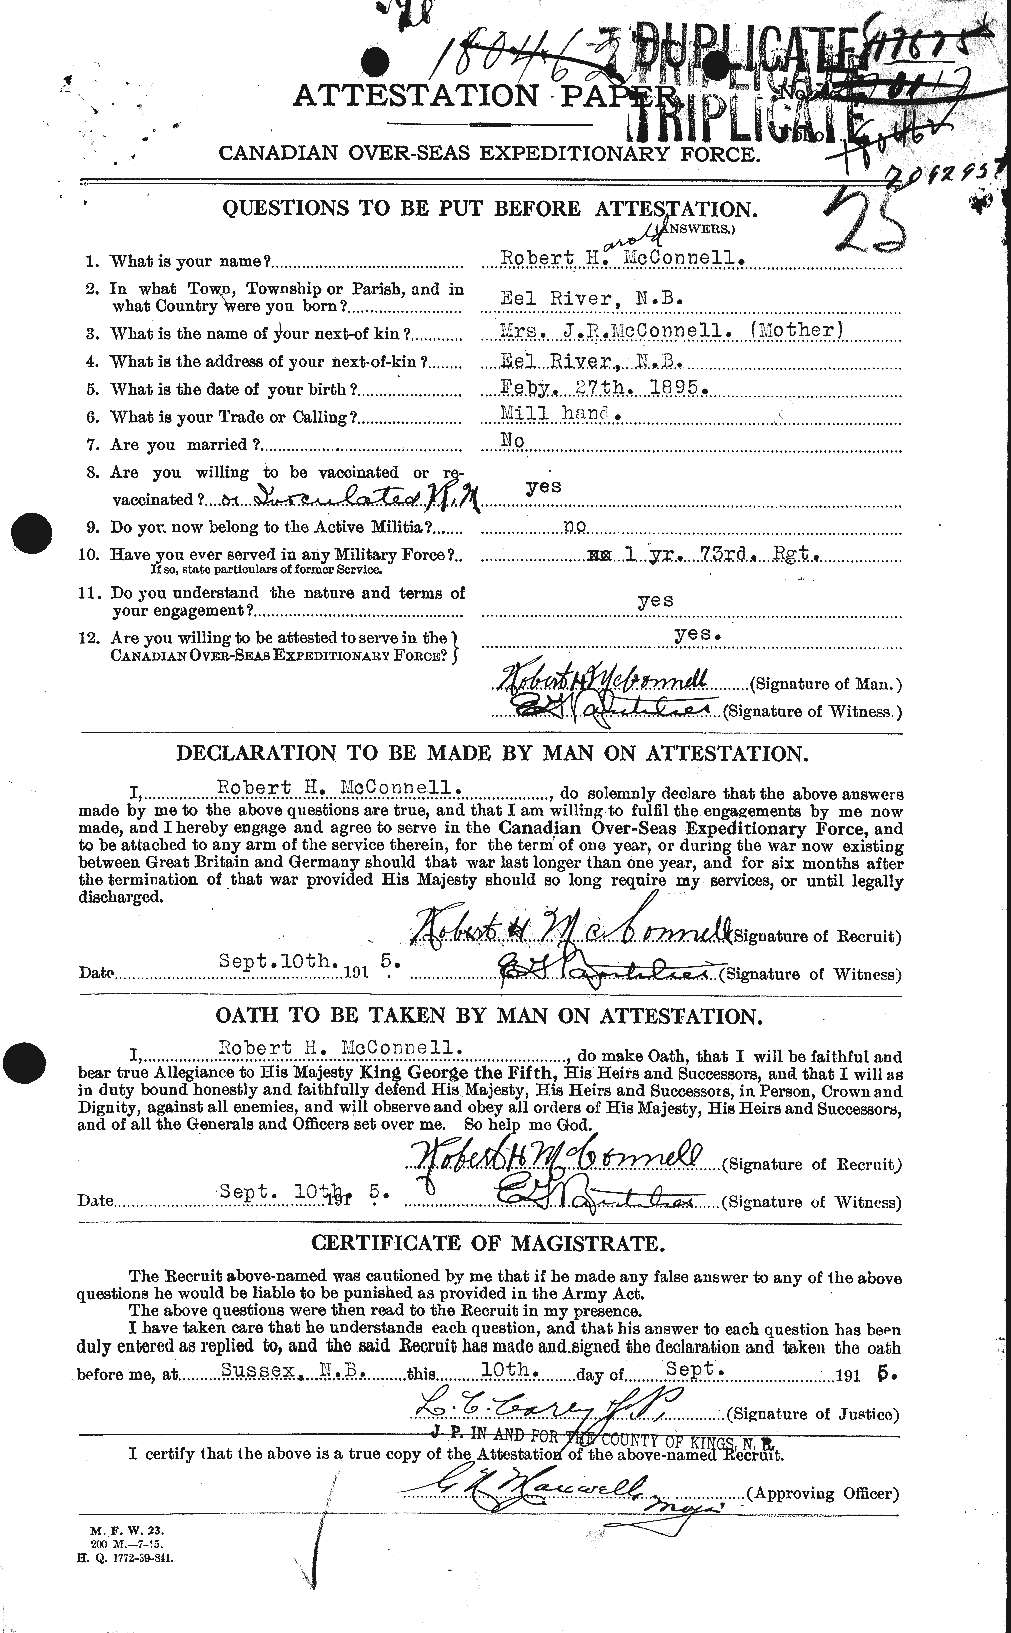 Personnel Records of the First World War - CEF 134394a